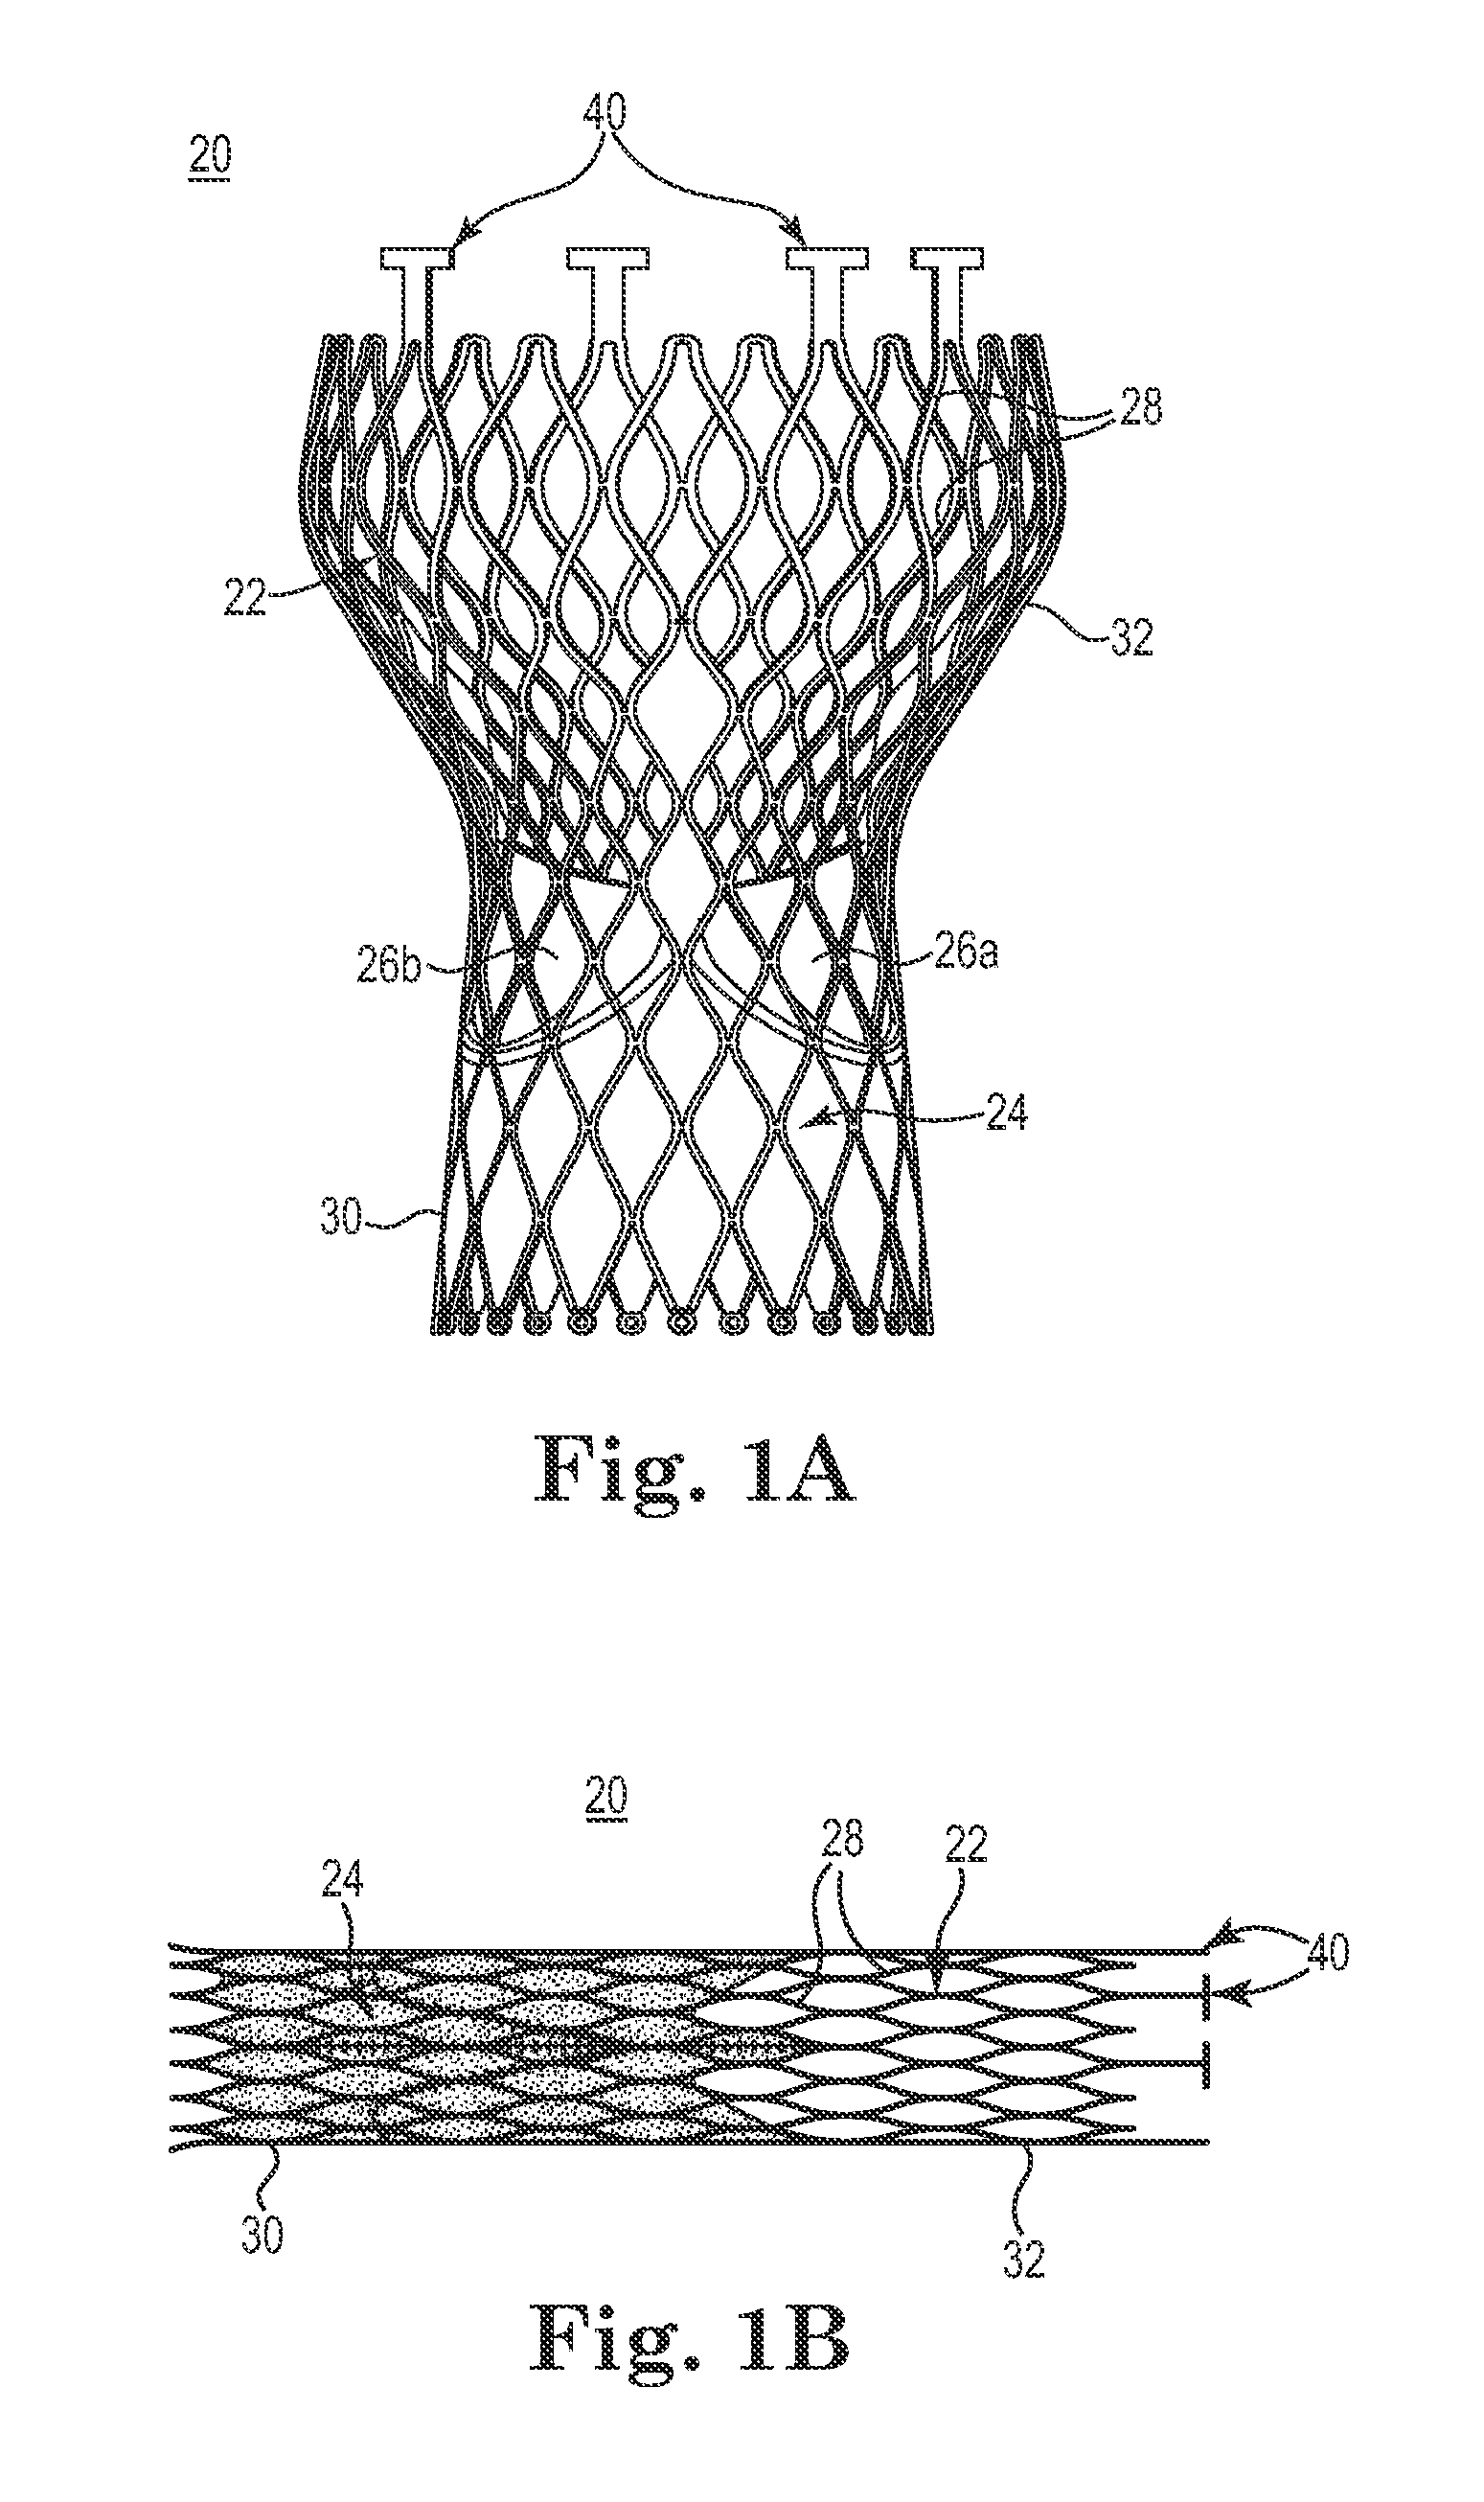 Transcatheter Prosthetic Heart Valve Delivery Device With Passive Trigger Release